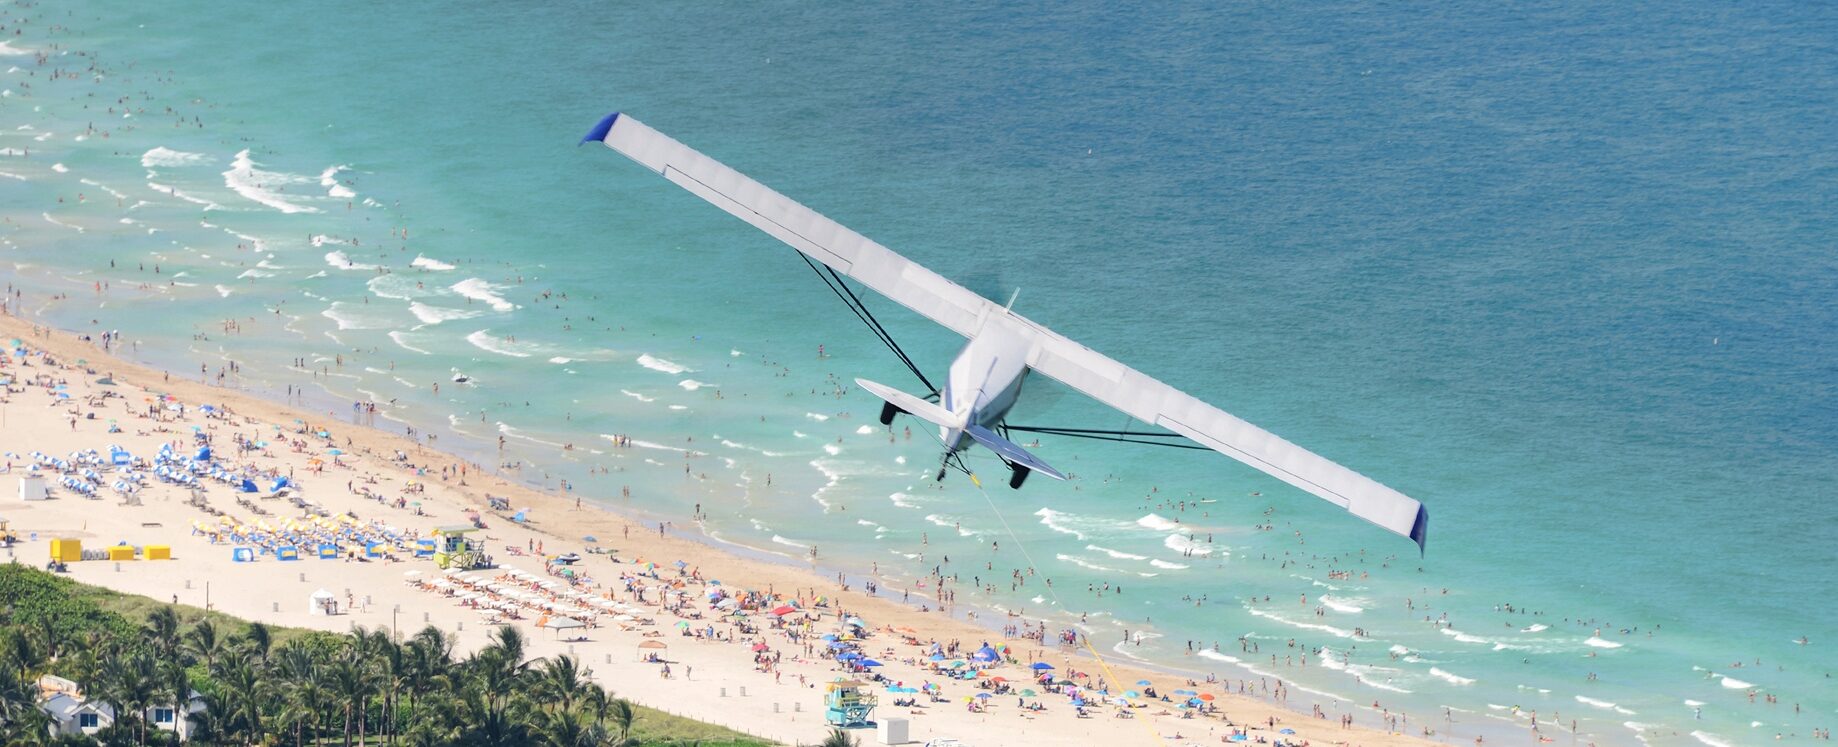 Banner Towing Piper Cub over beach